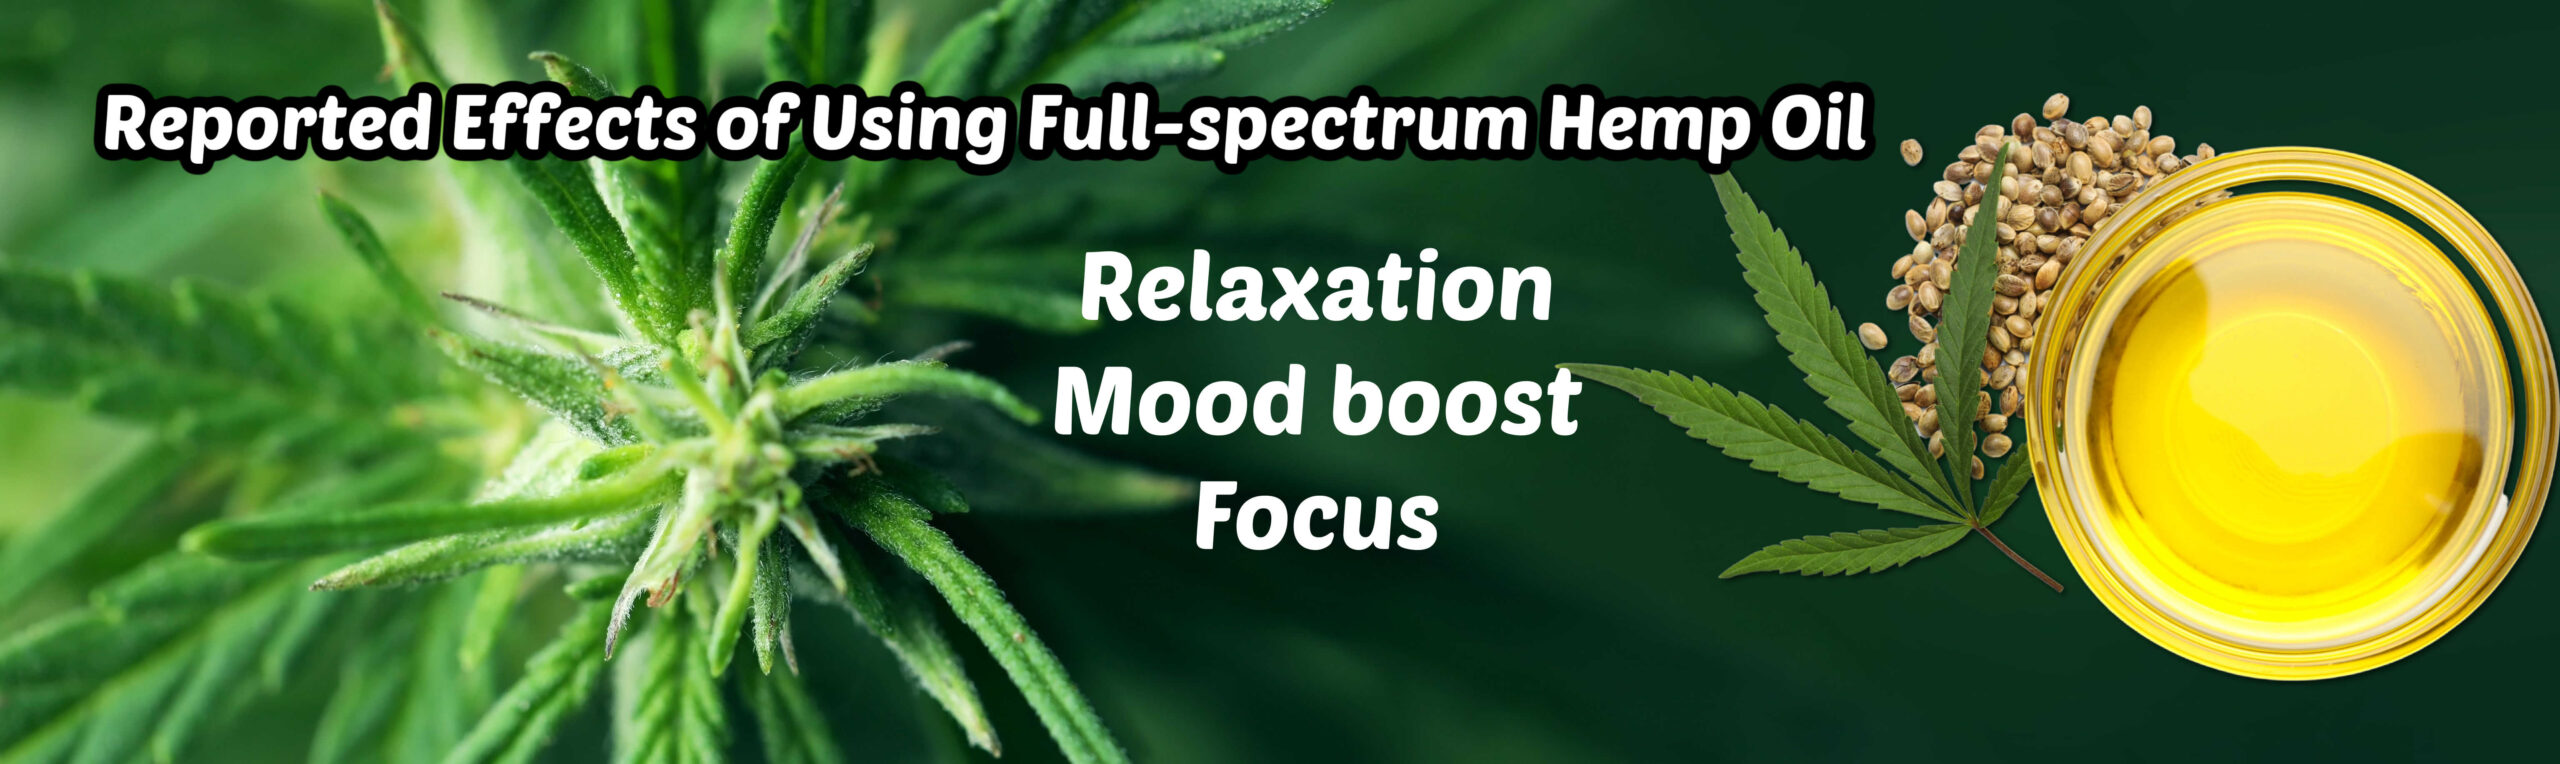 image of reported effects of using full spectrum hemp oil